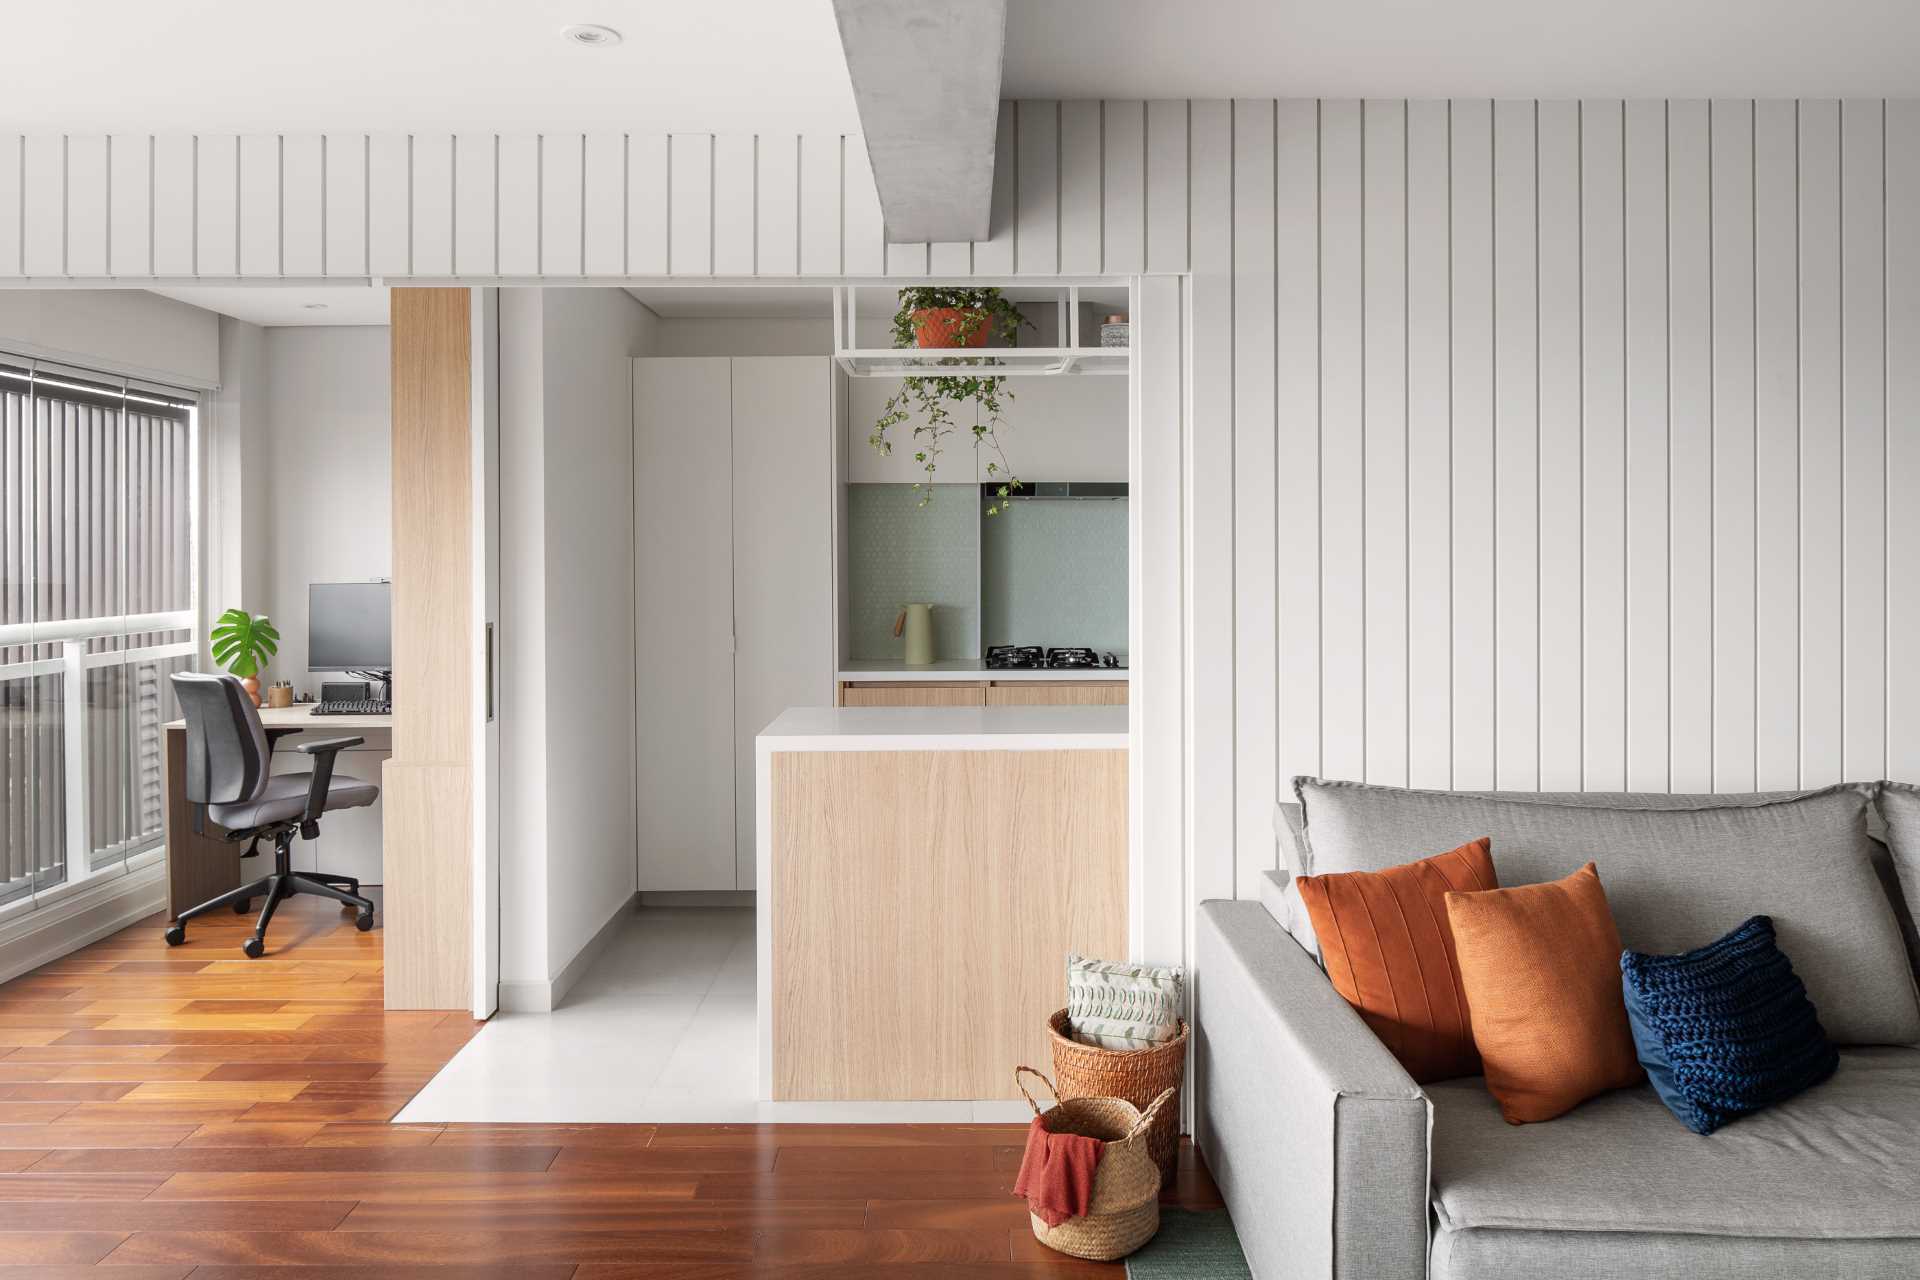 A wall in the living room opens to reveal the kitchen and home office.